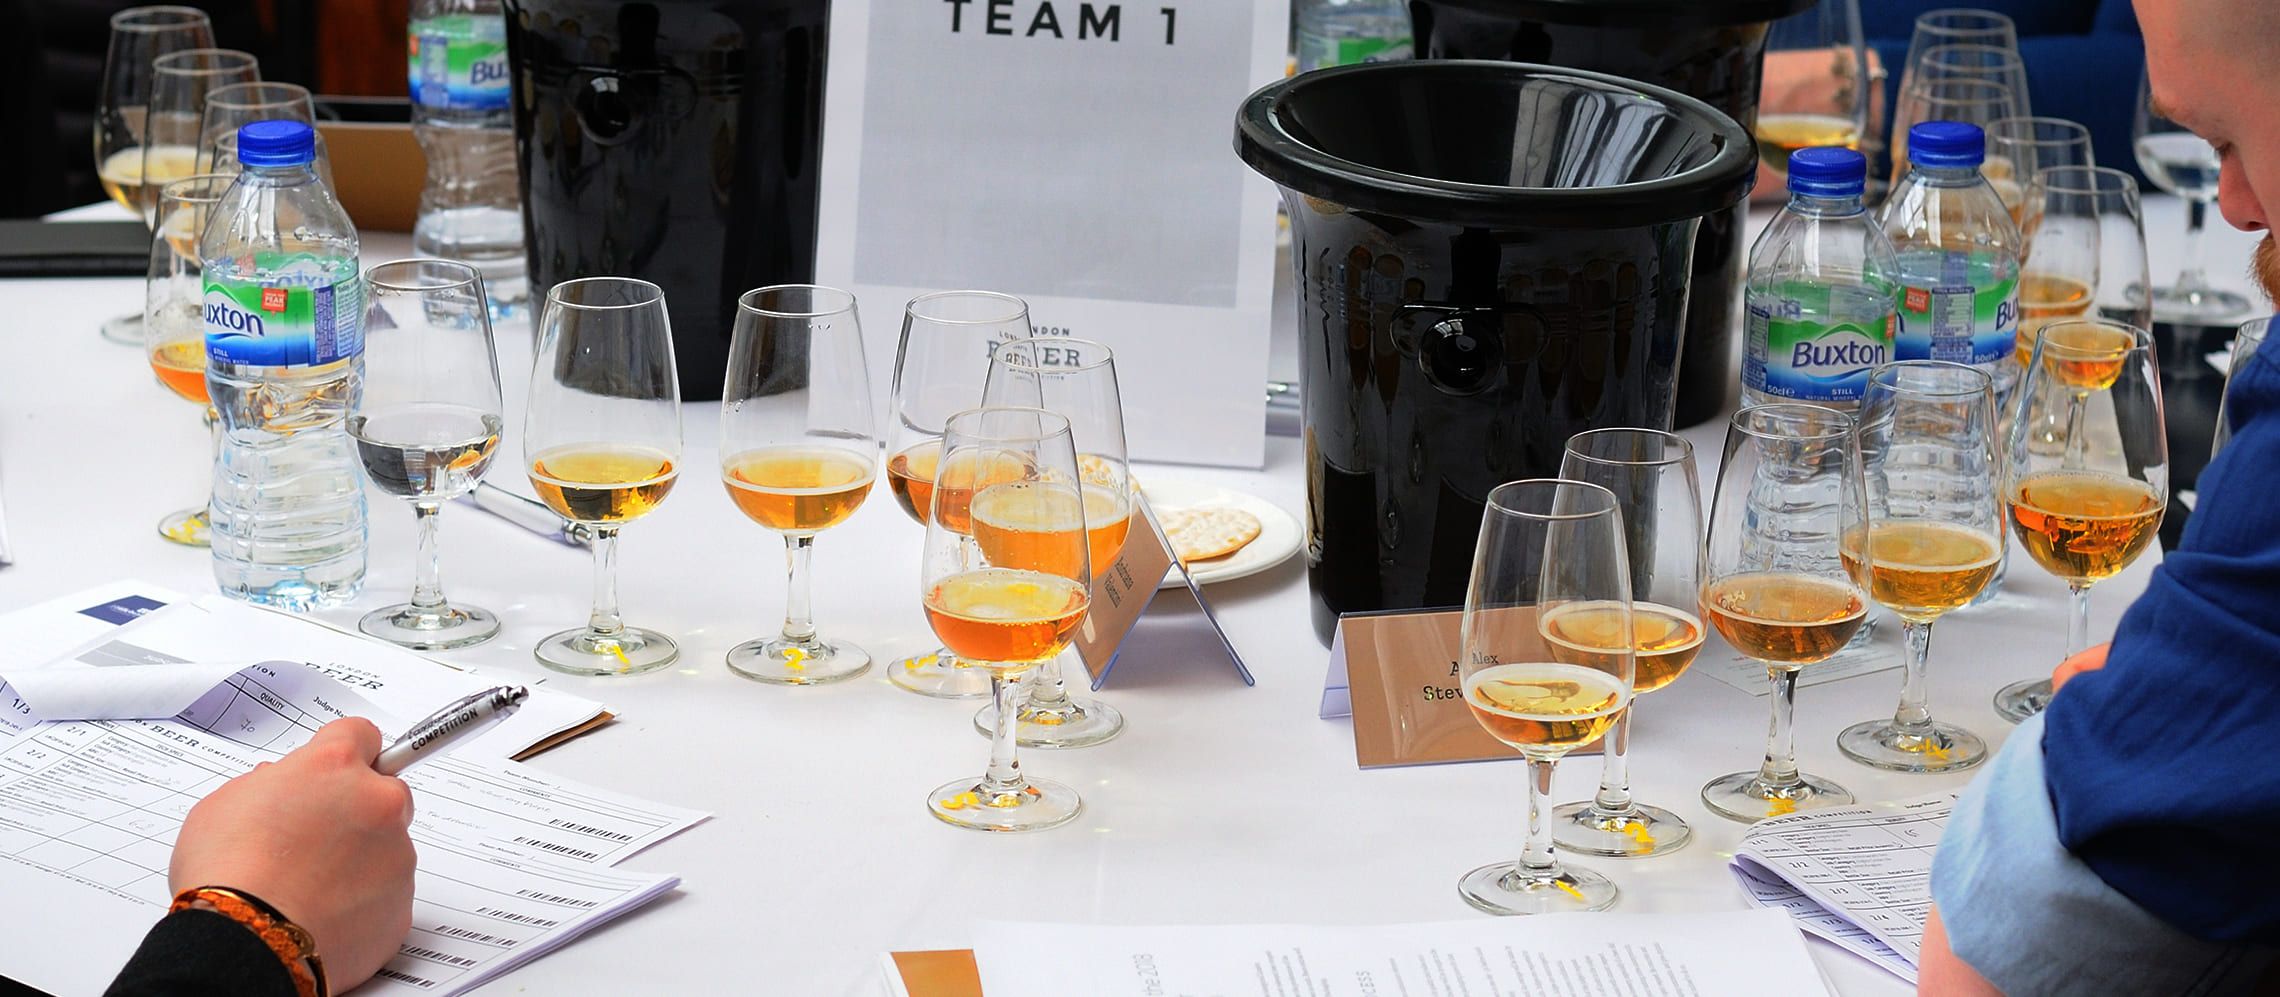 Photo for: A Glance Into One Of The World’s Most Important Beer Competitions